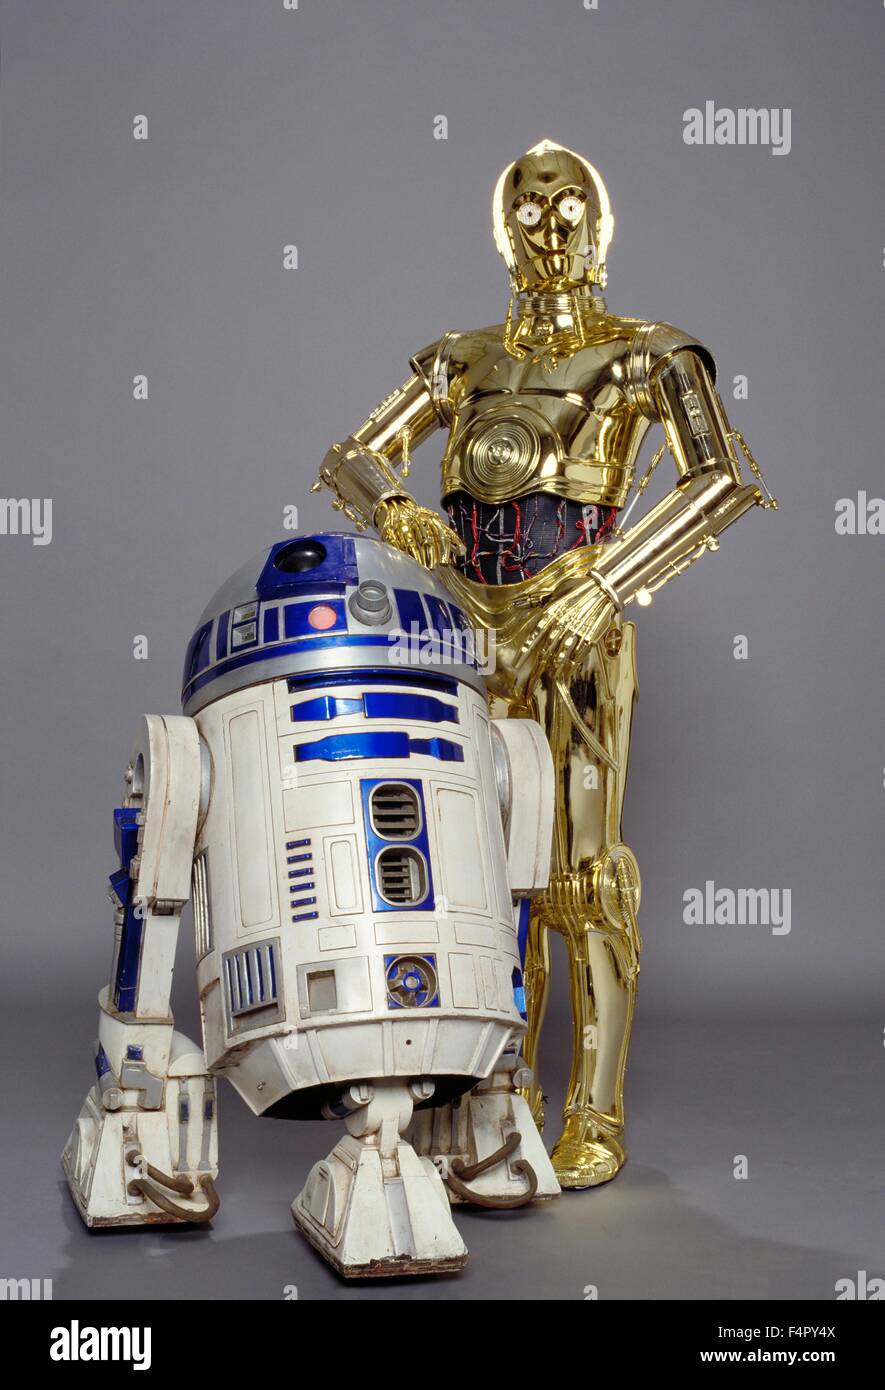 R2-D2 and C-3PO / Star Wars-Episode III Revenge of the Sith / 2005, directed by George Lucas, Walt Disney Studios Motion Pictures. Stock Photo